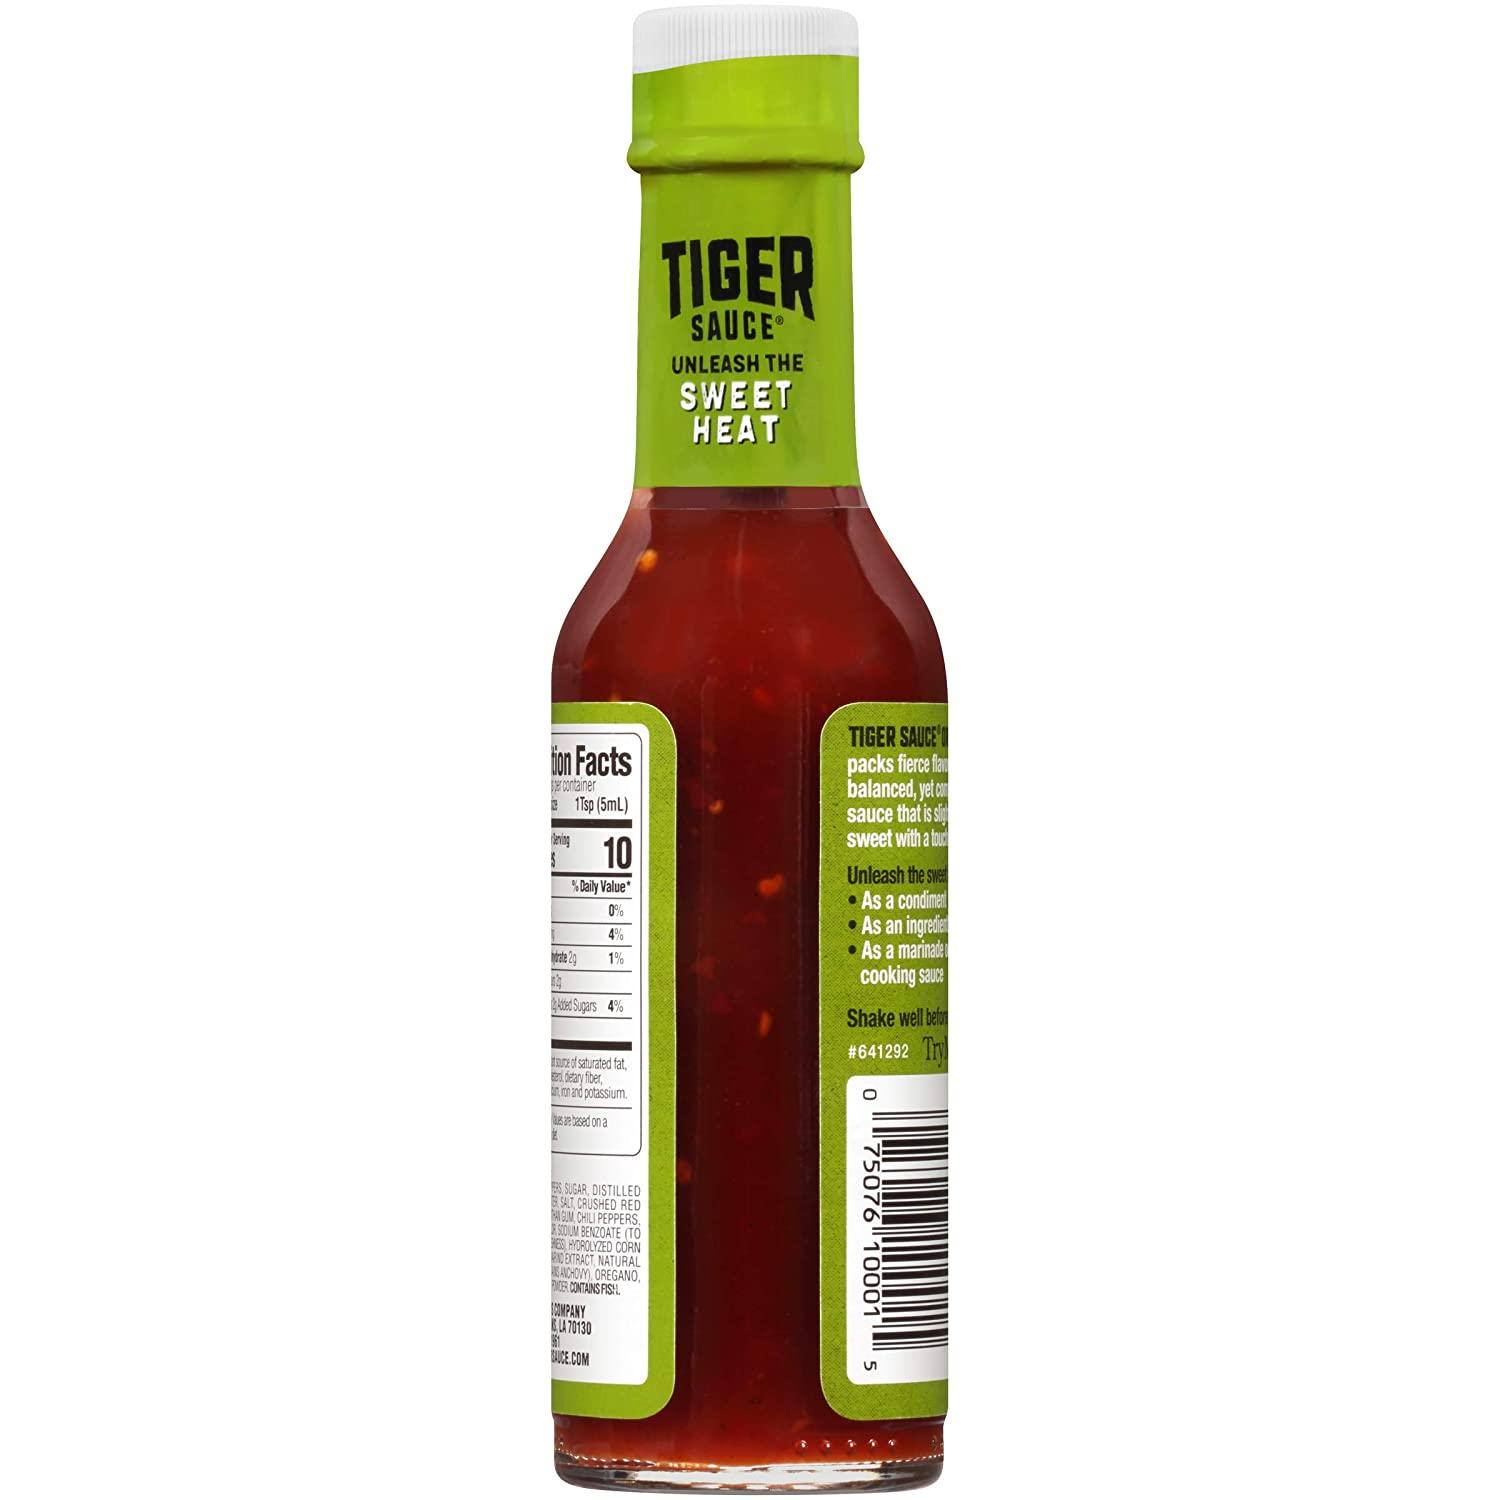  Try Me Tiger Seasoning, 5.5 Ounce (Pack of 6